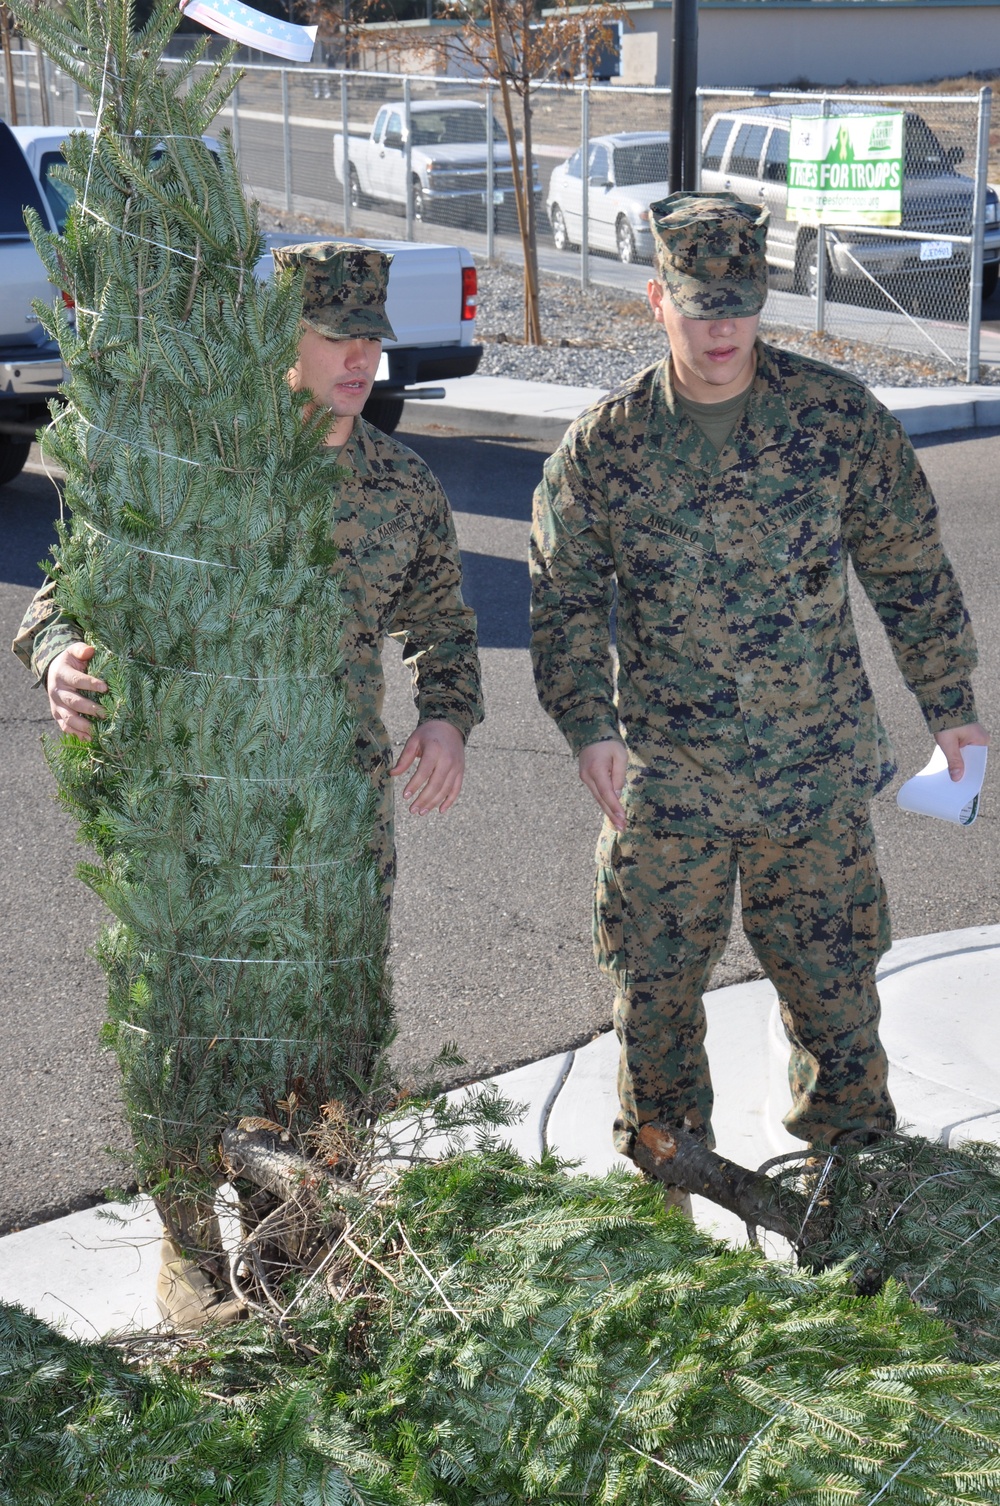 Trees for Troops spreads Christmas spirit to Marines, families